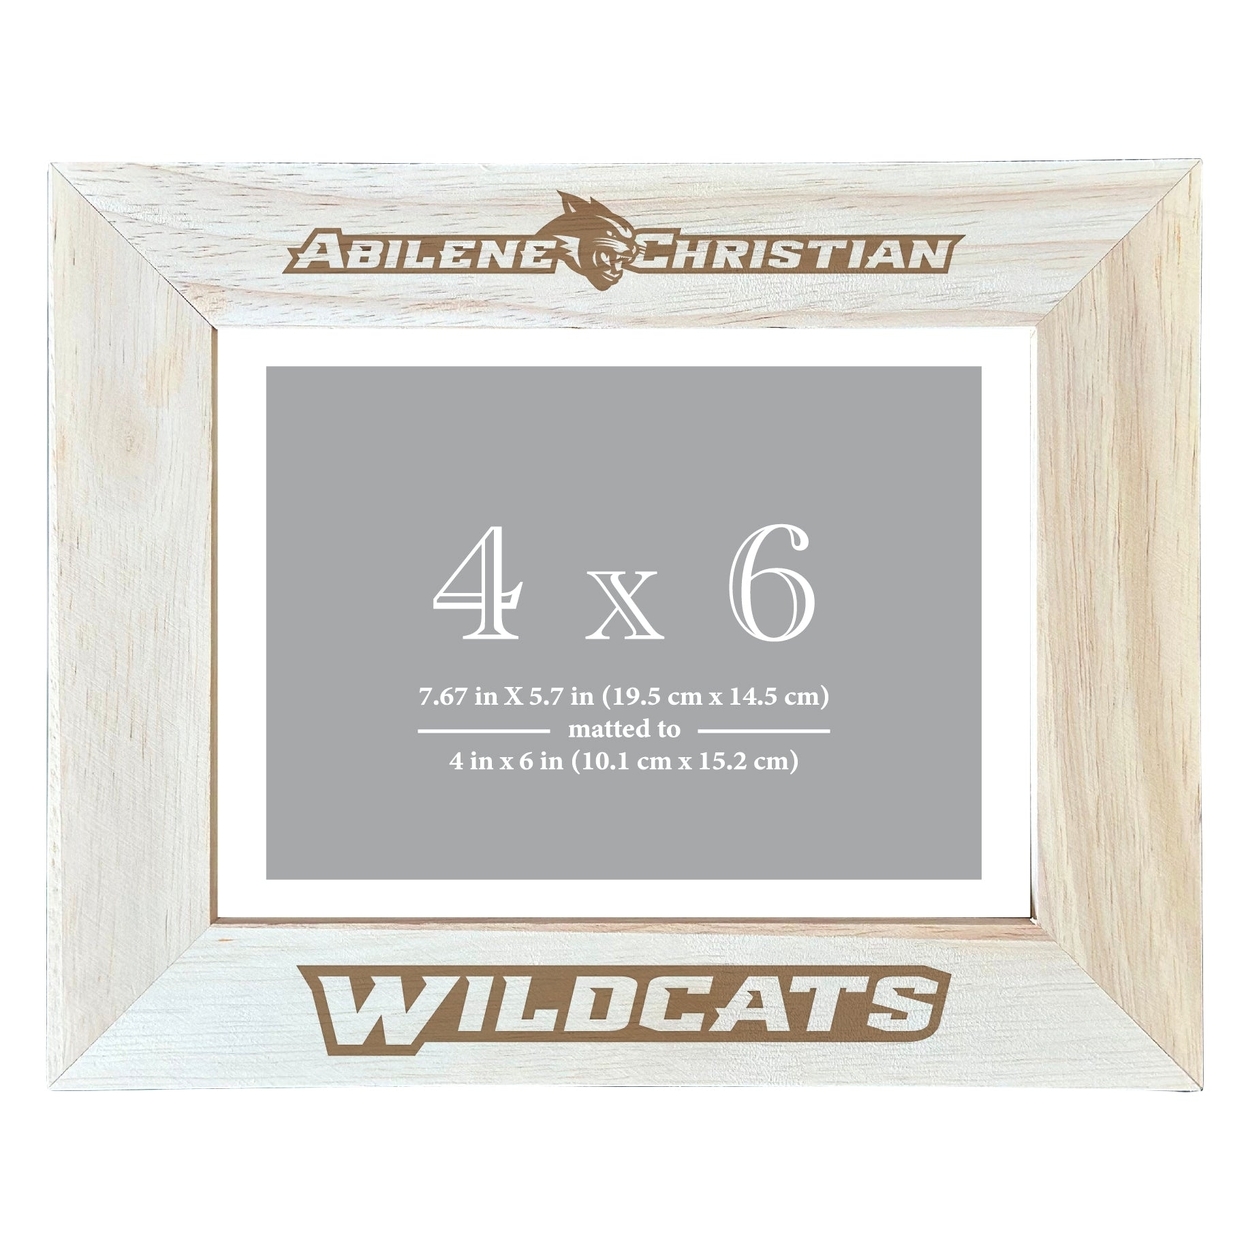 Abilene Christian University Wooden Photo Frame Matted To 4 X 6 Inch - Etched